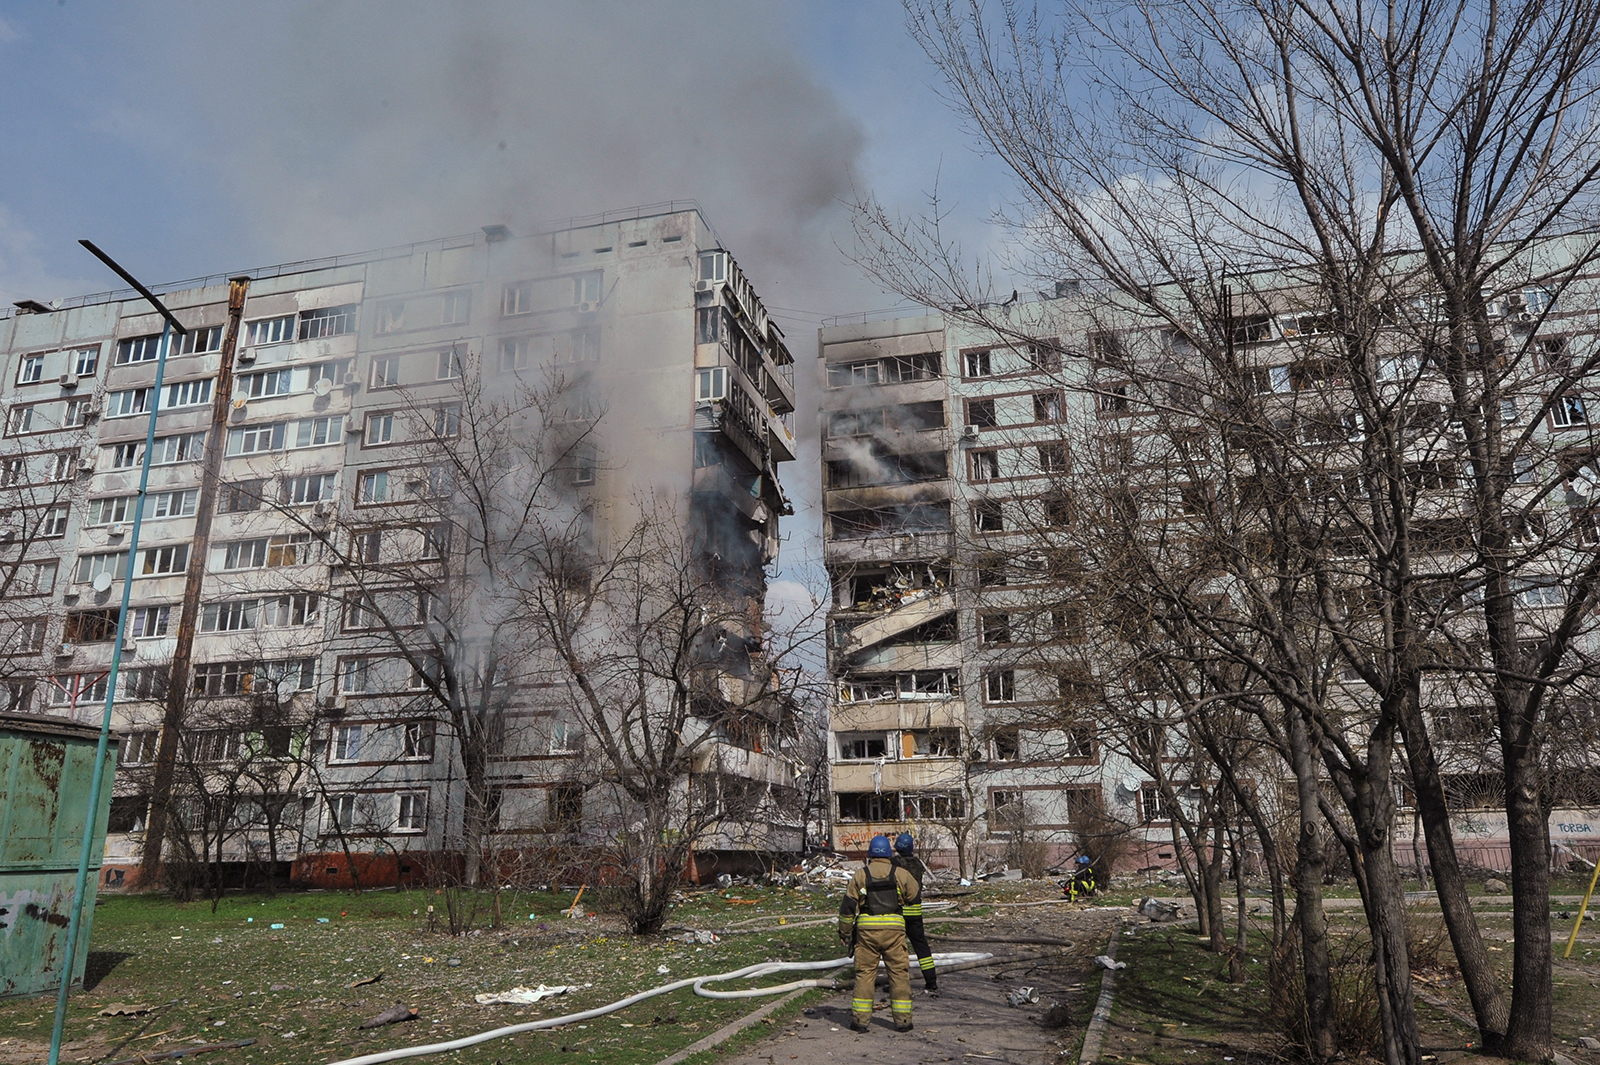 Rescuers stand in front of a residential building damaged by a Russian missile strike in Zaporizhzhia, Ukraine on March 22.